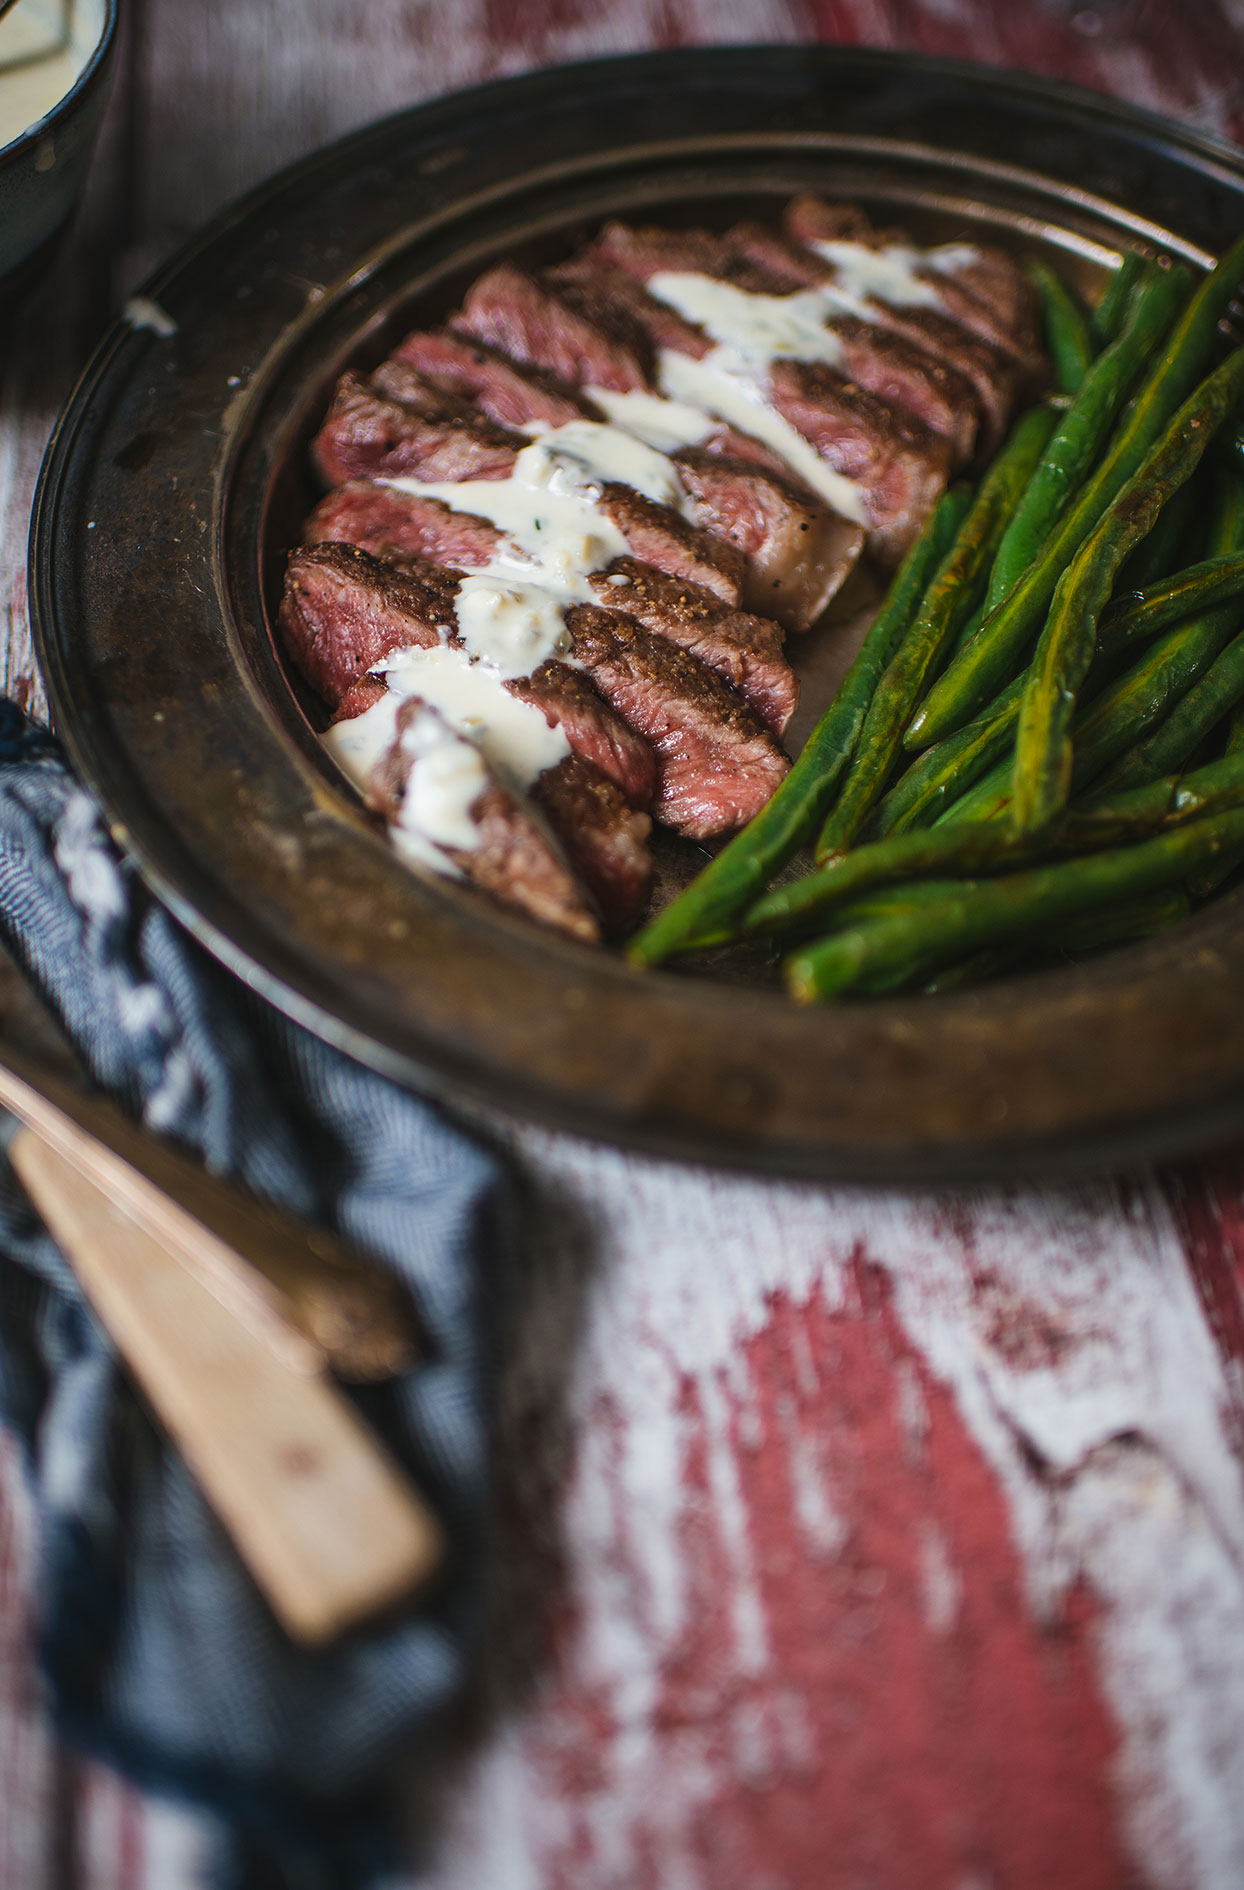 Beef striploin with blue cheese sauce